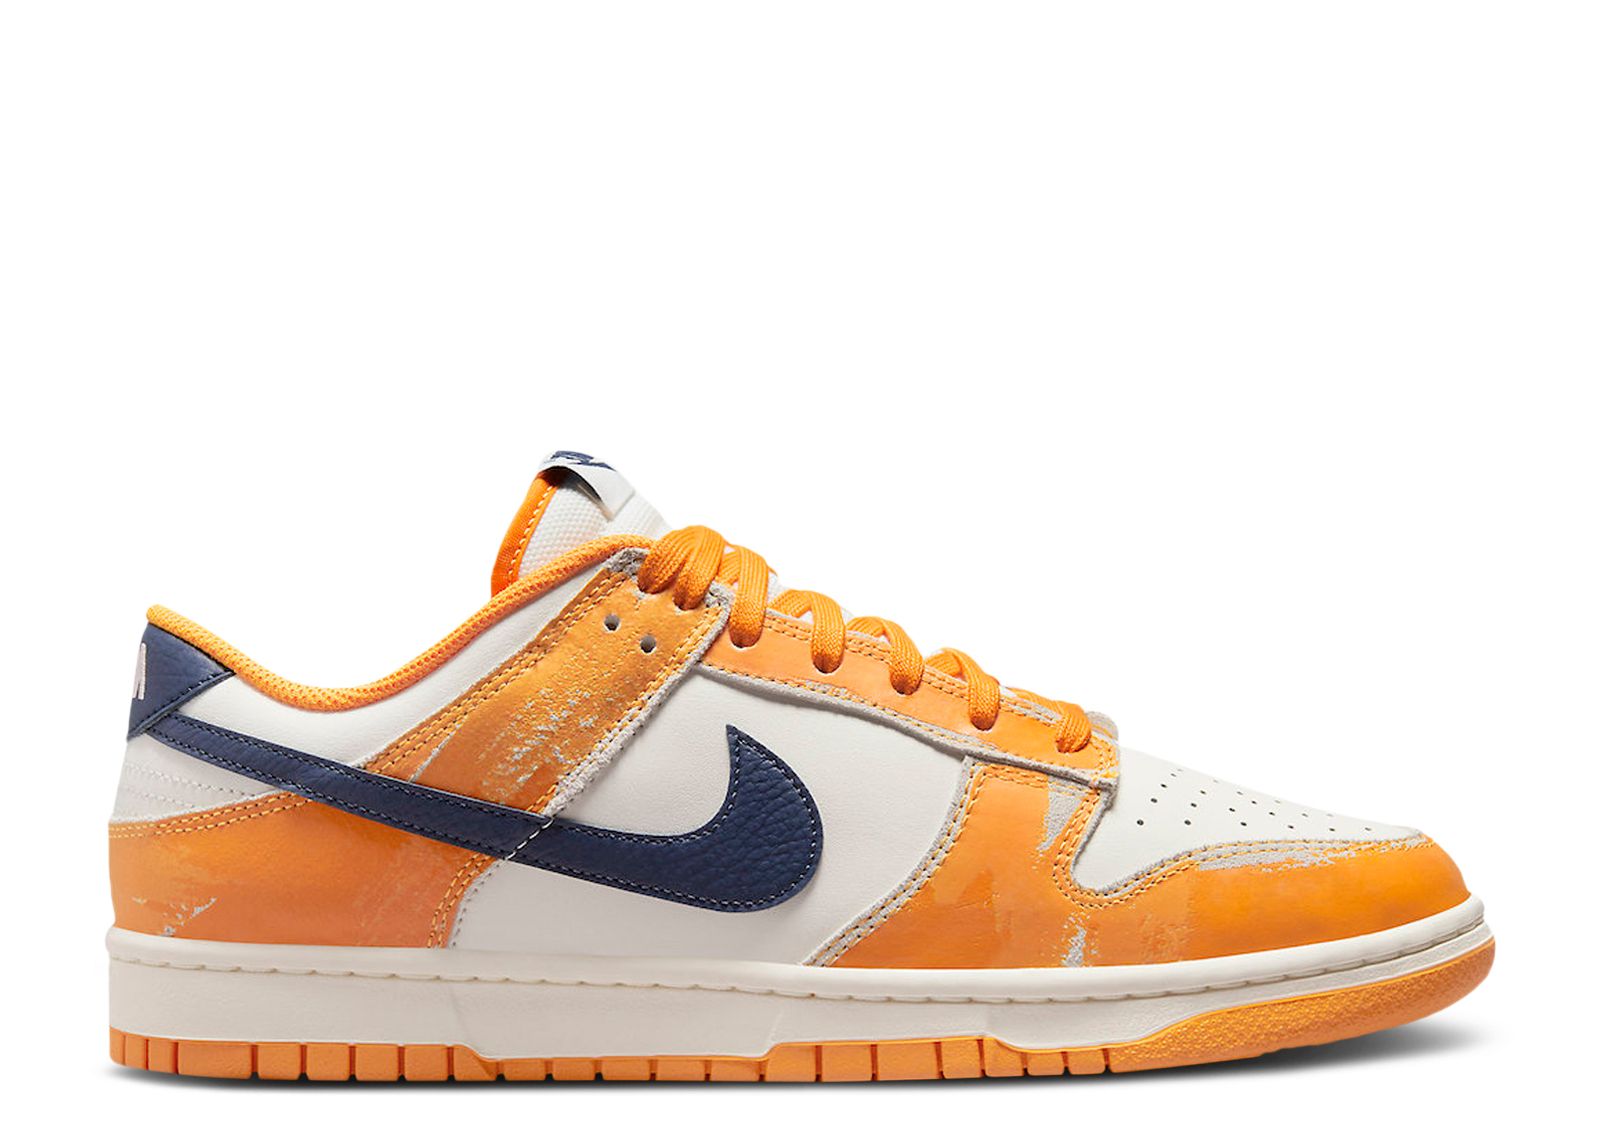 Nike Dunk Low Retro Casual Shoes (Men's Sizing)